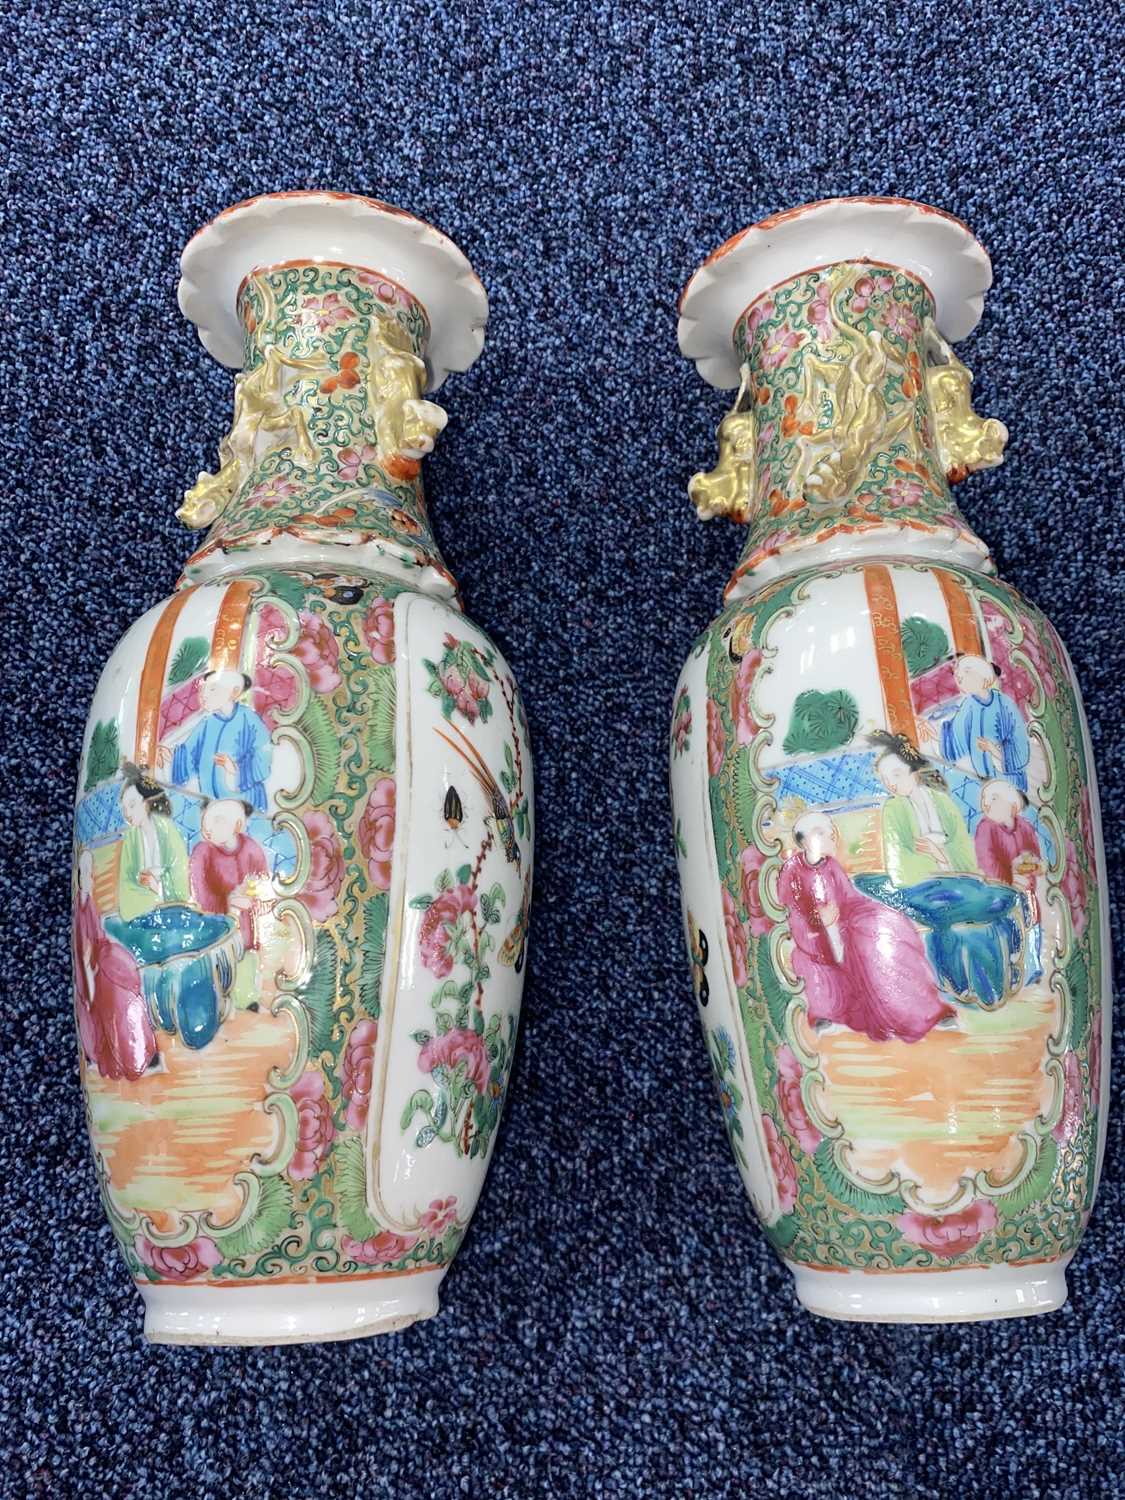 PAIR OF CHINESE FAMILLE ROSE VASES, MID 19TH CENTURY - Image 4 of 11